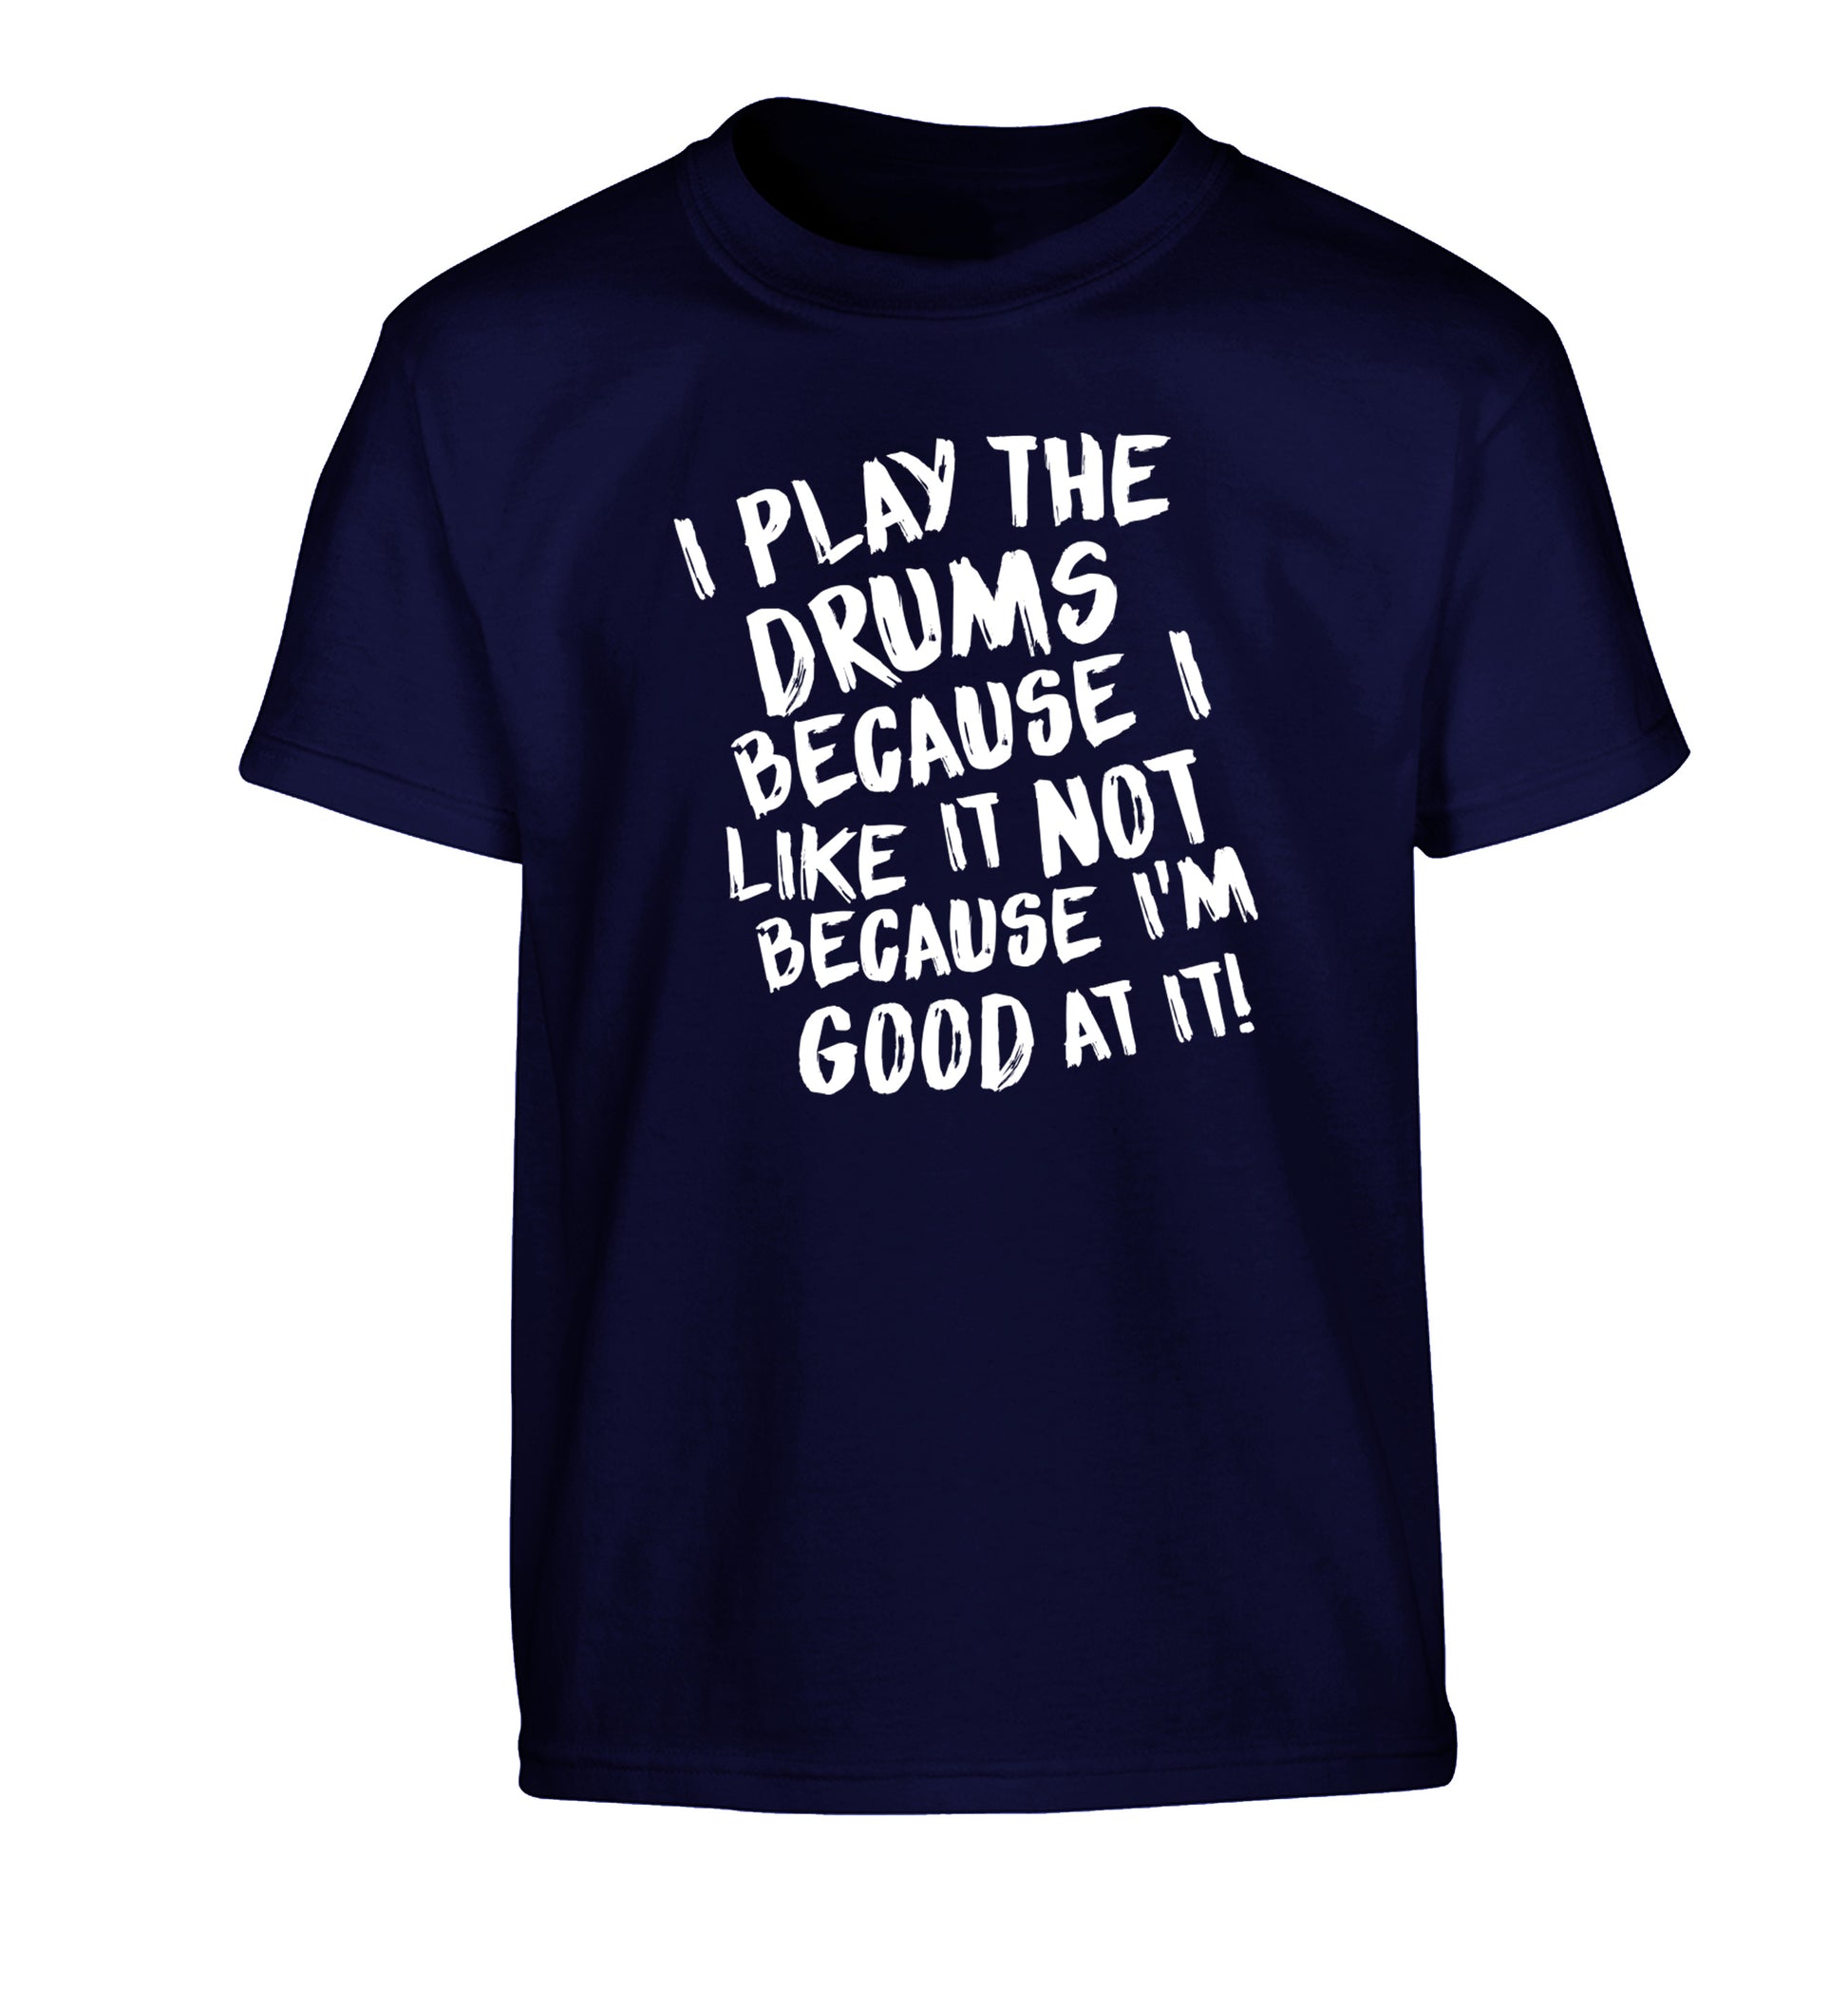 I play the drums because I like it not because I'm good at it Children's navy Tshirt 12-14 Years